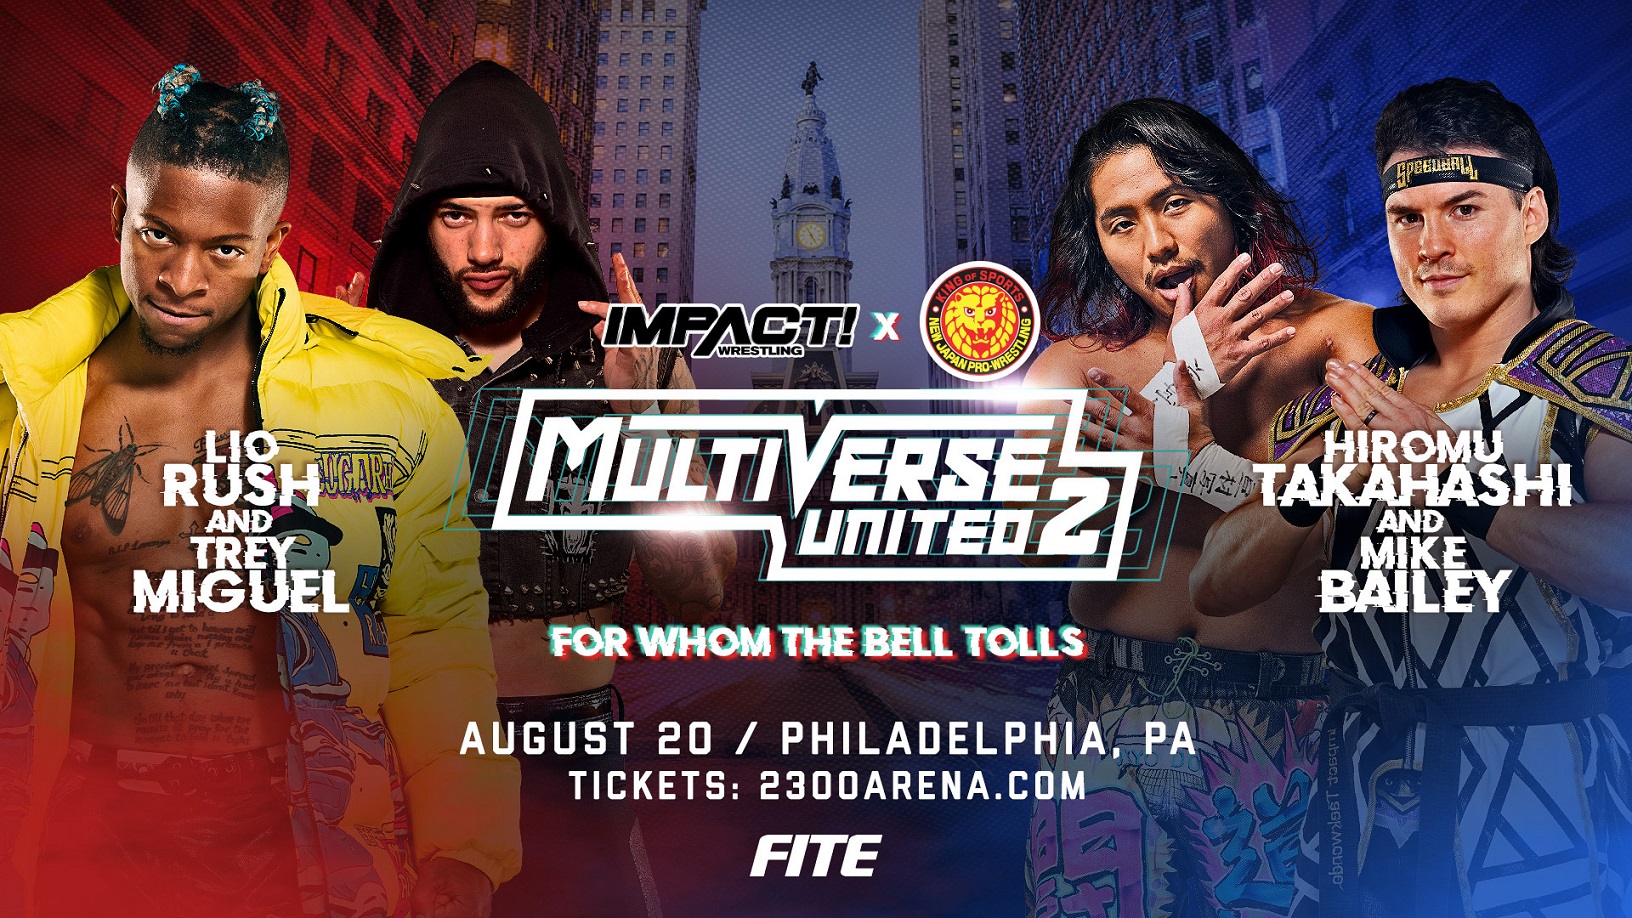 Mike Bailey Teams With Hiromu Takahashi to Battle Lio Rush & Trey Miguel at Multiverse United 2